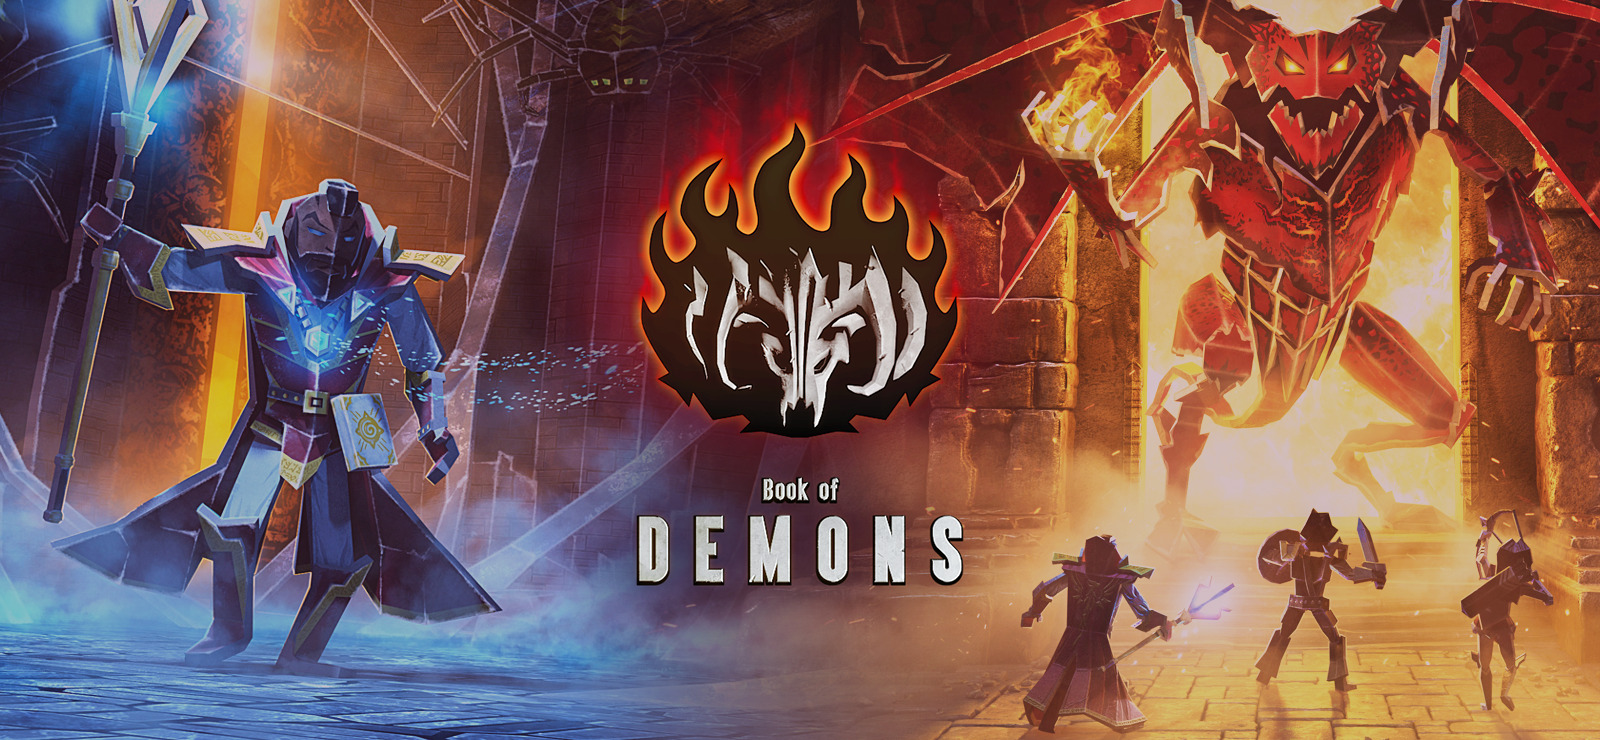 
Book of Demons is a Hack & Slash Deck-building hybrid in which YOU decide the length of 